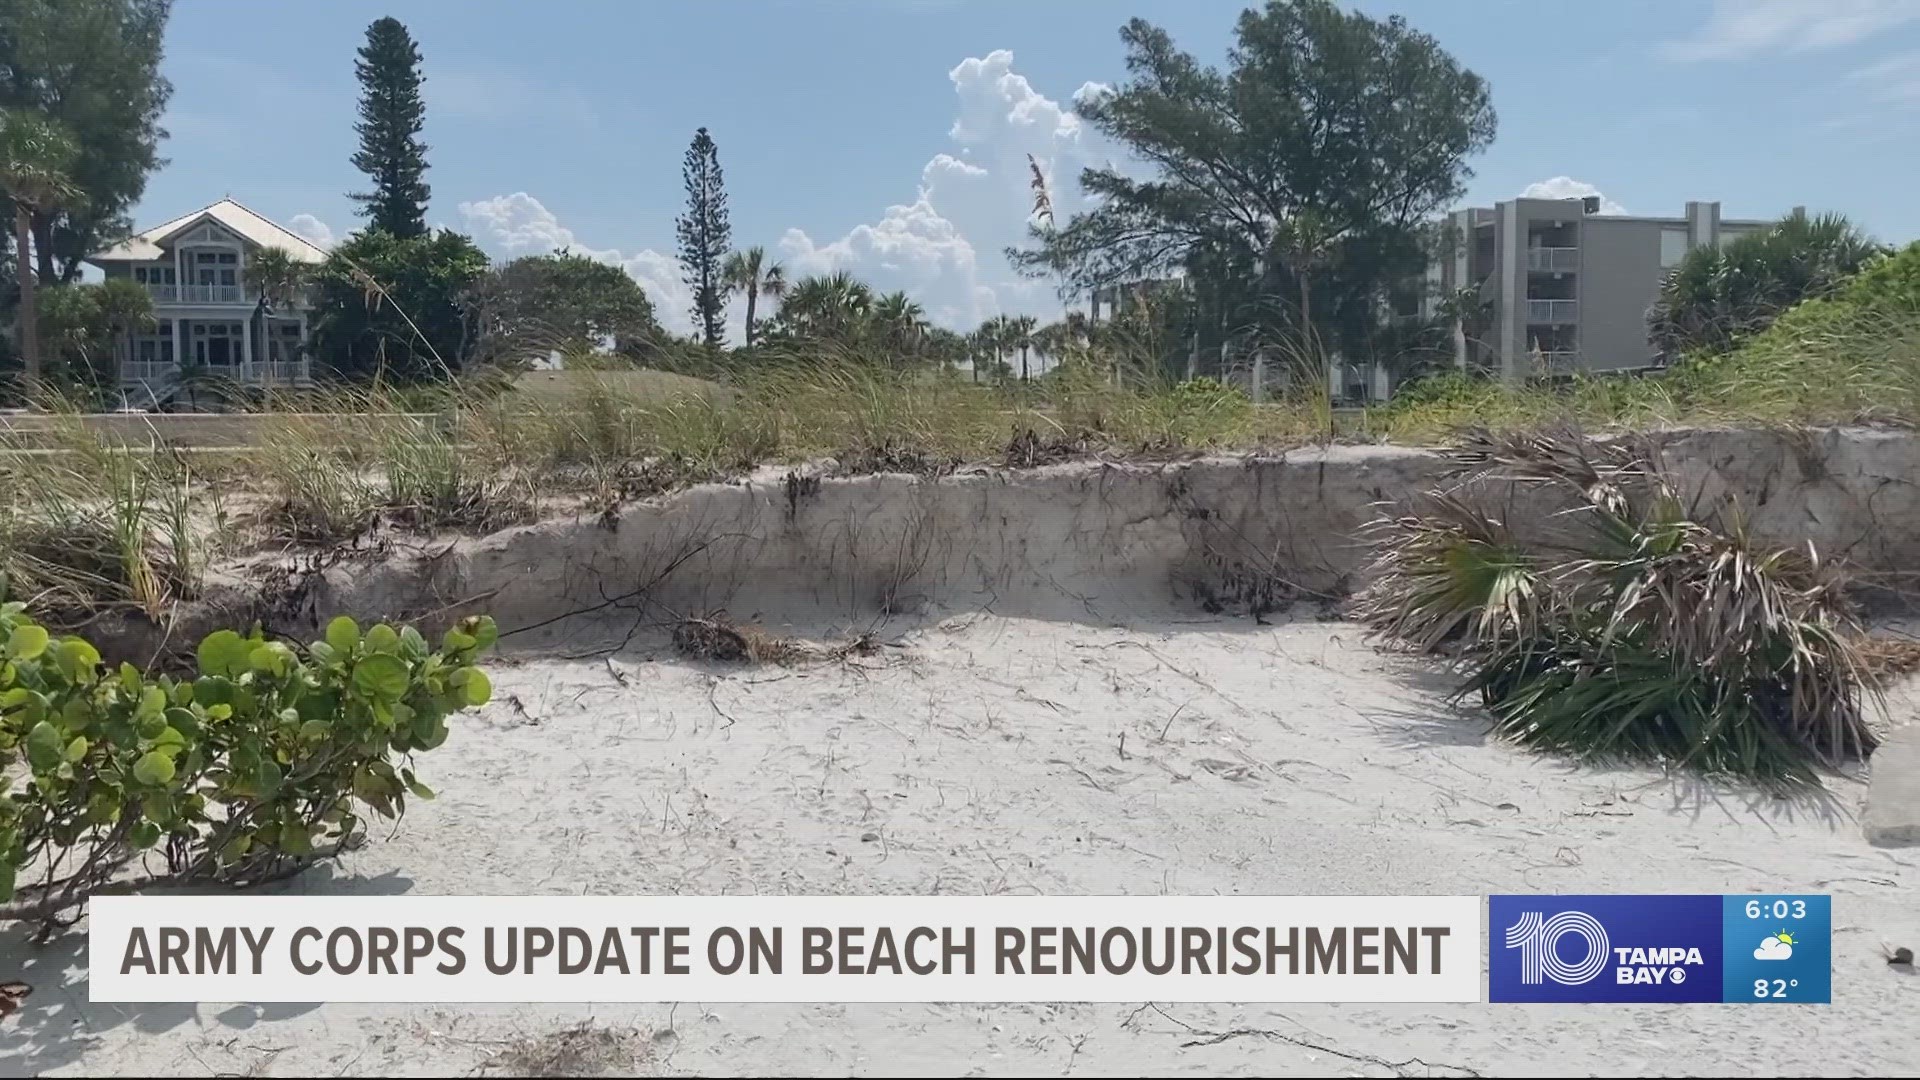 Some beach renourishment projects in Pinellas County have been delayed for years. Today, the Army Corps gave an update on where they stand.